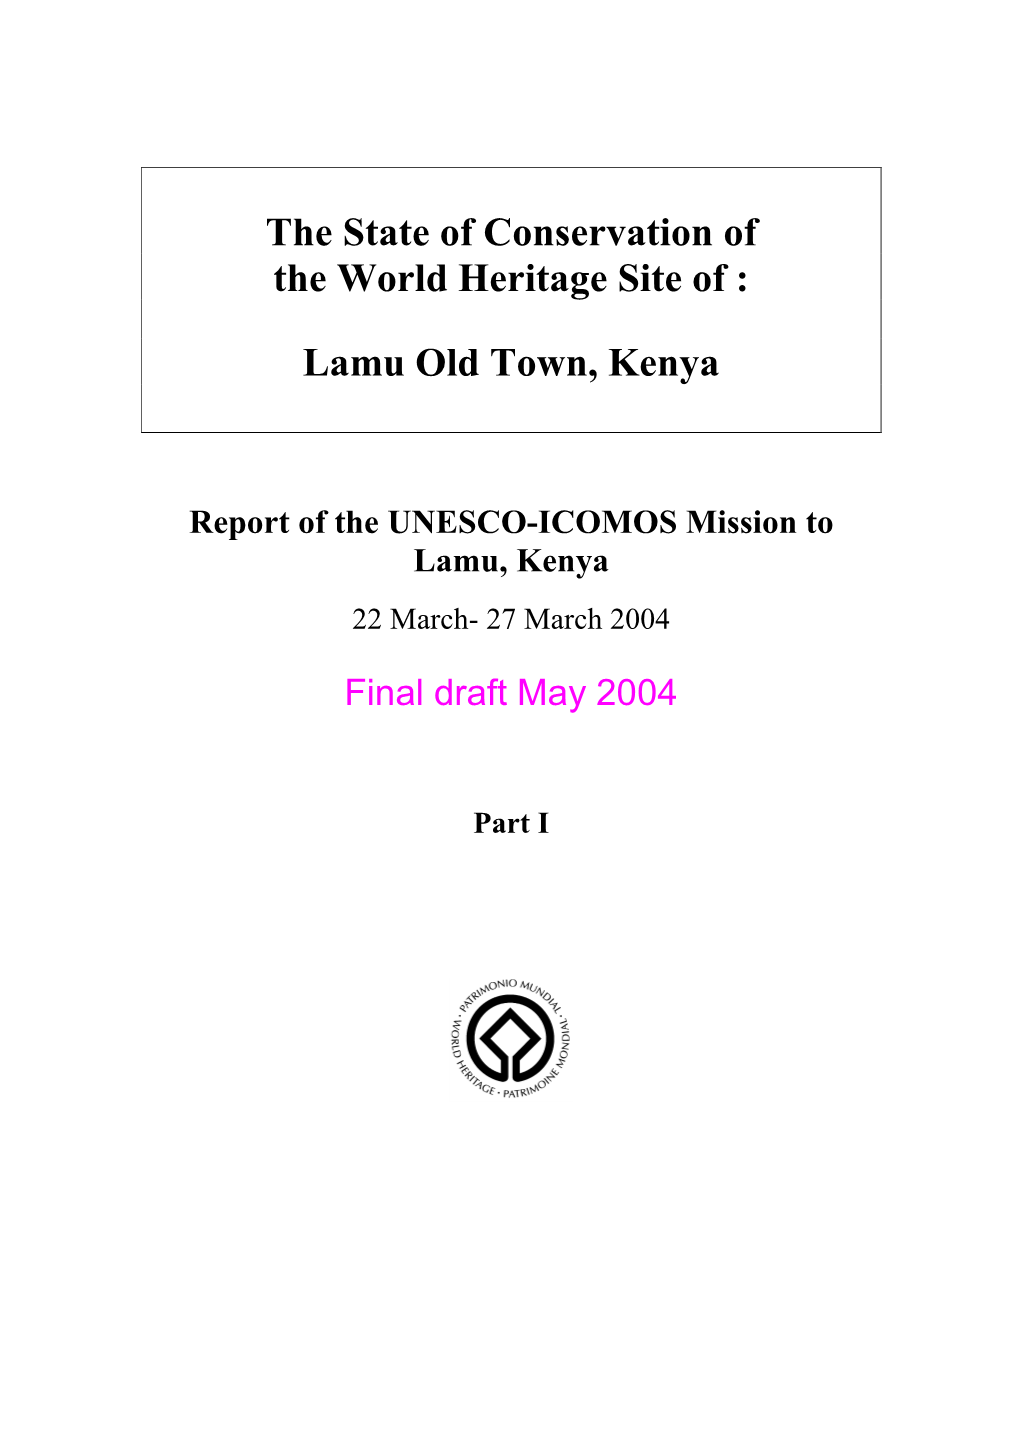 The State of Conservation of the World Heritage Site of : Lamu Old Town